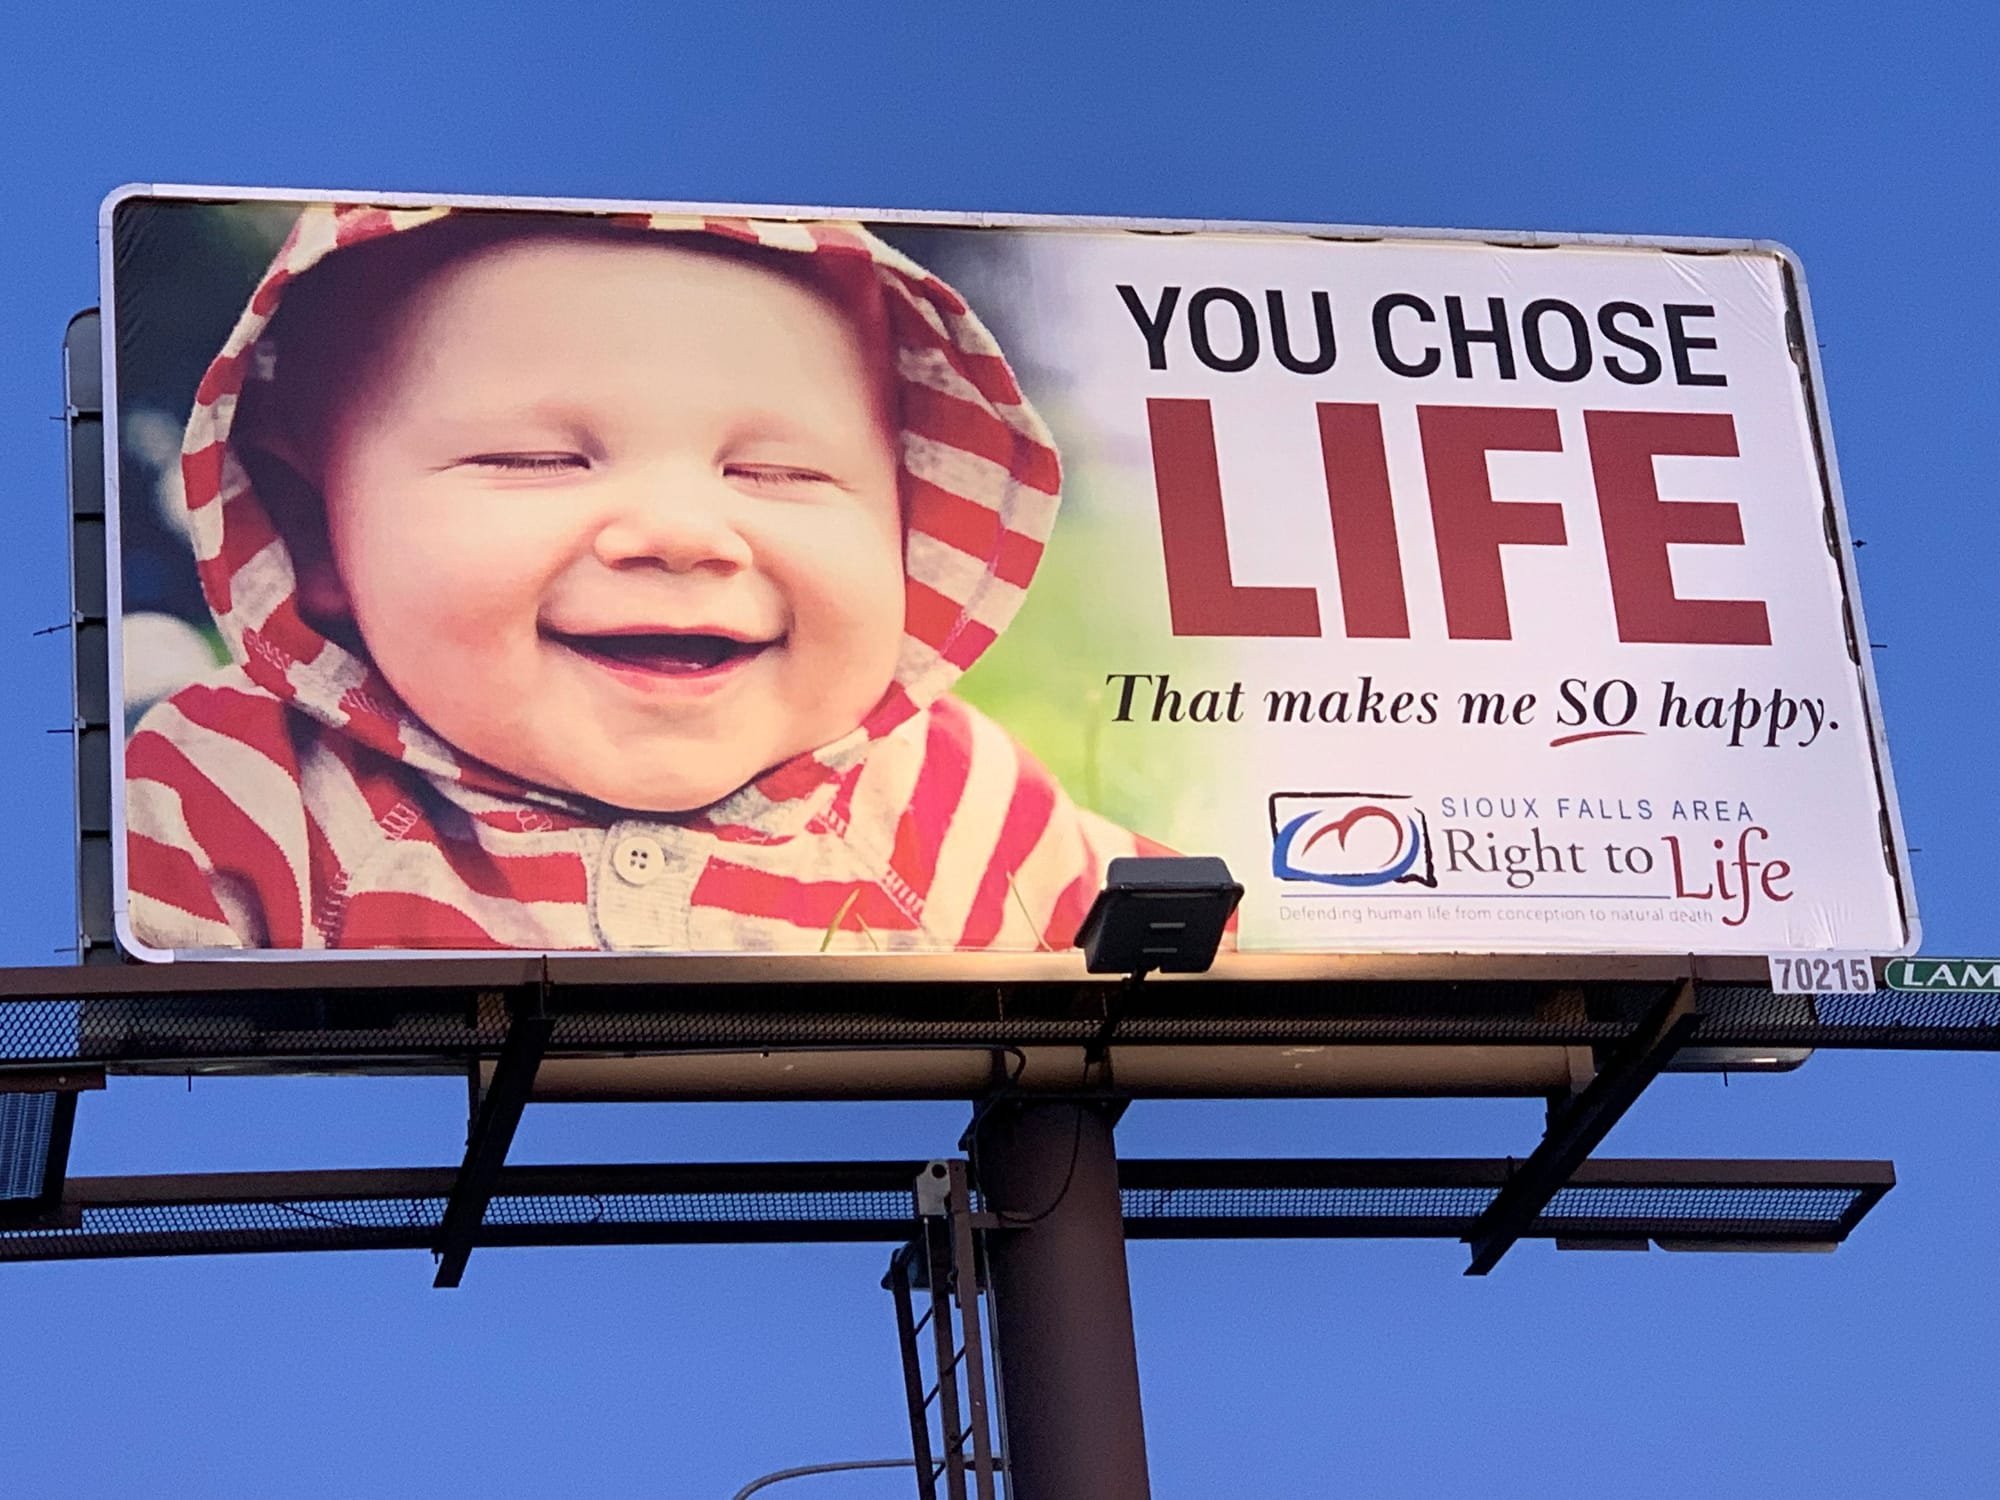 10th and Sycamore - Designed by Sioux Falls Area Right to Life